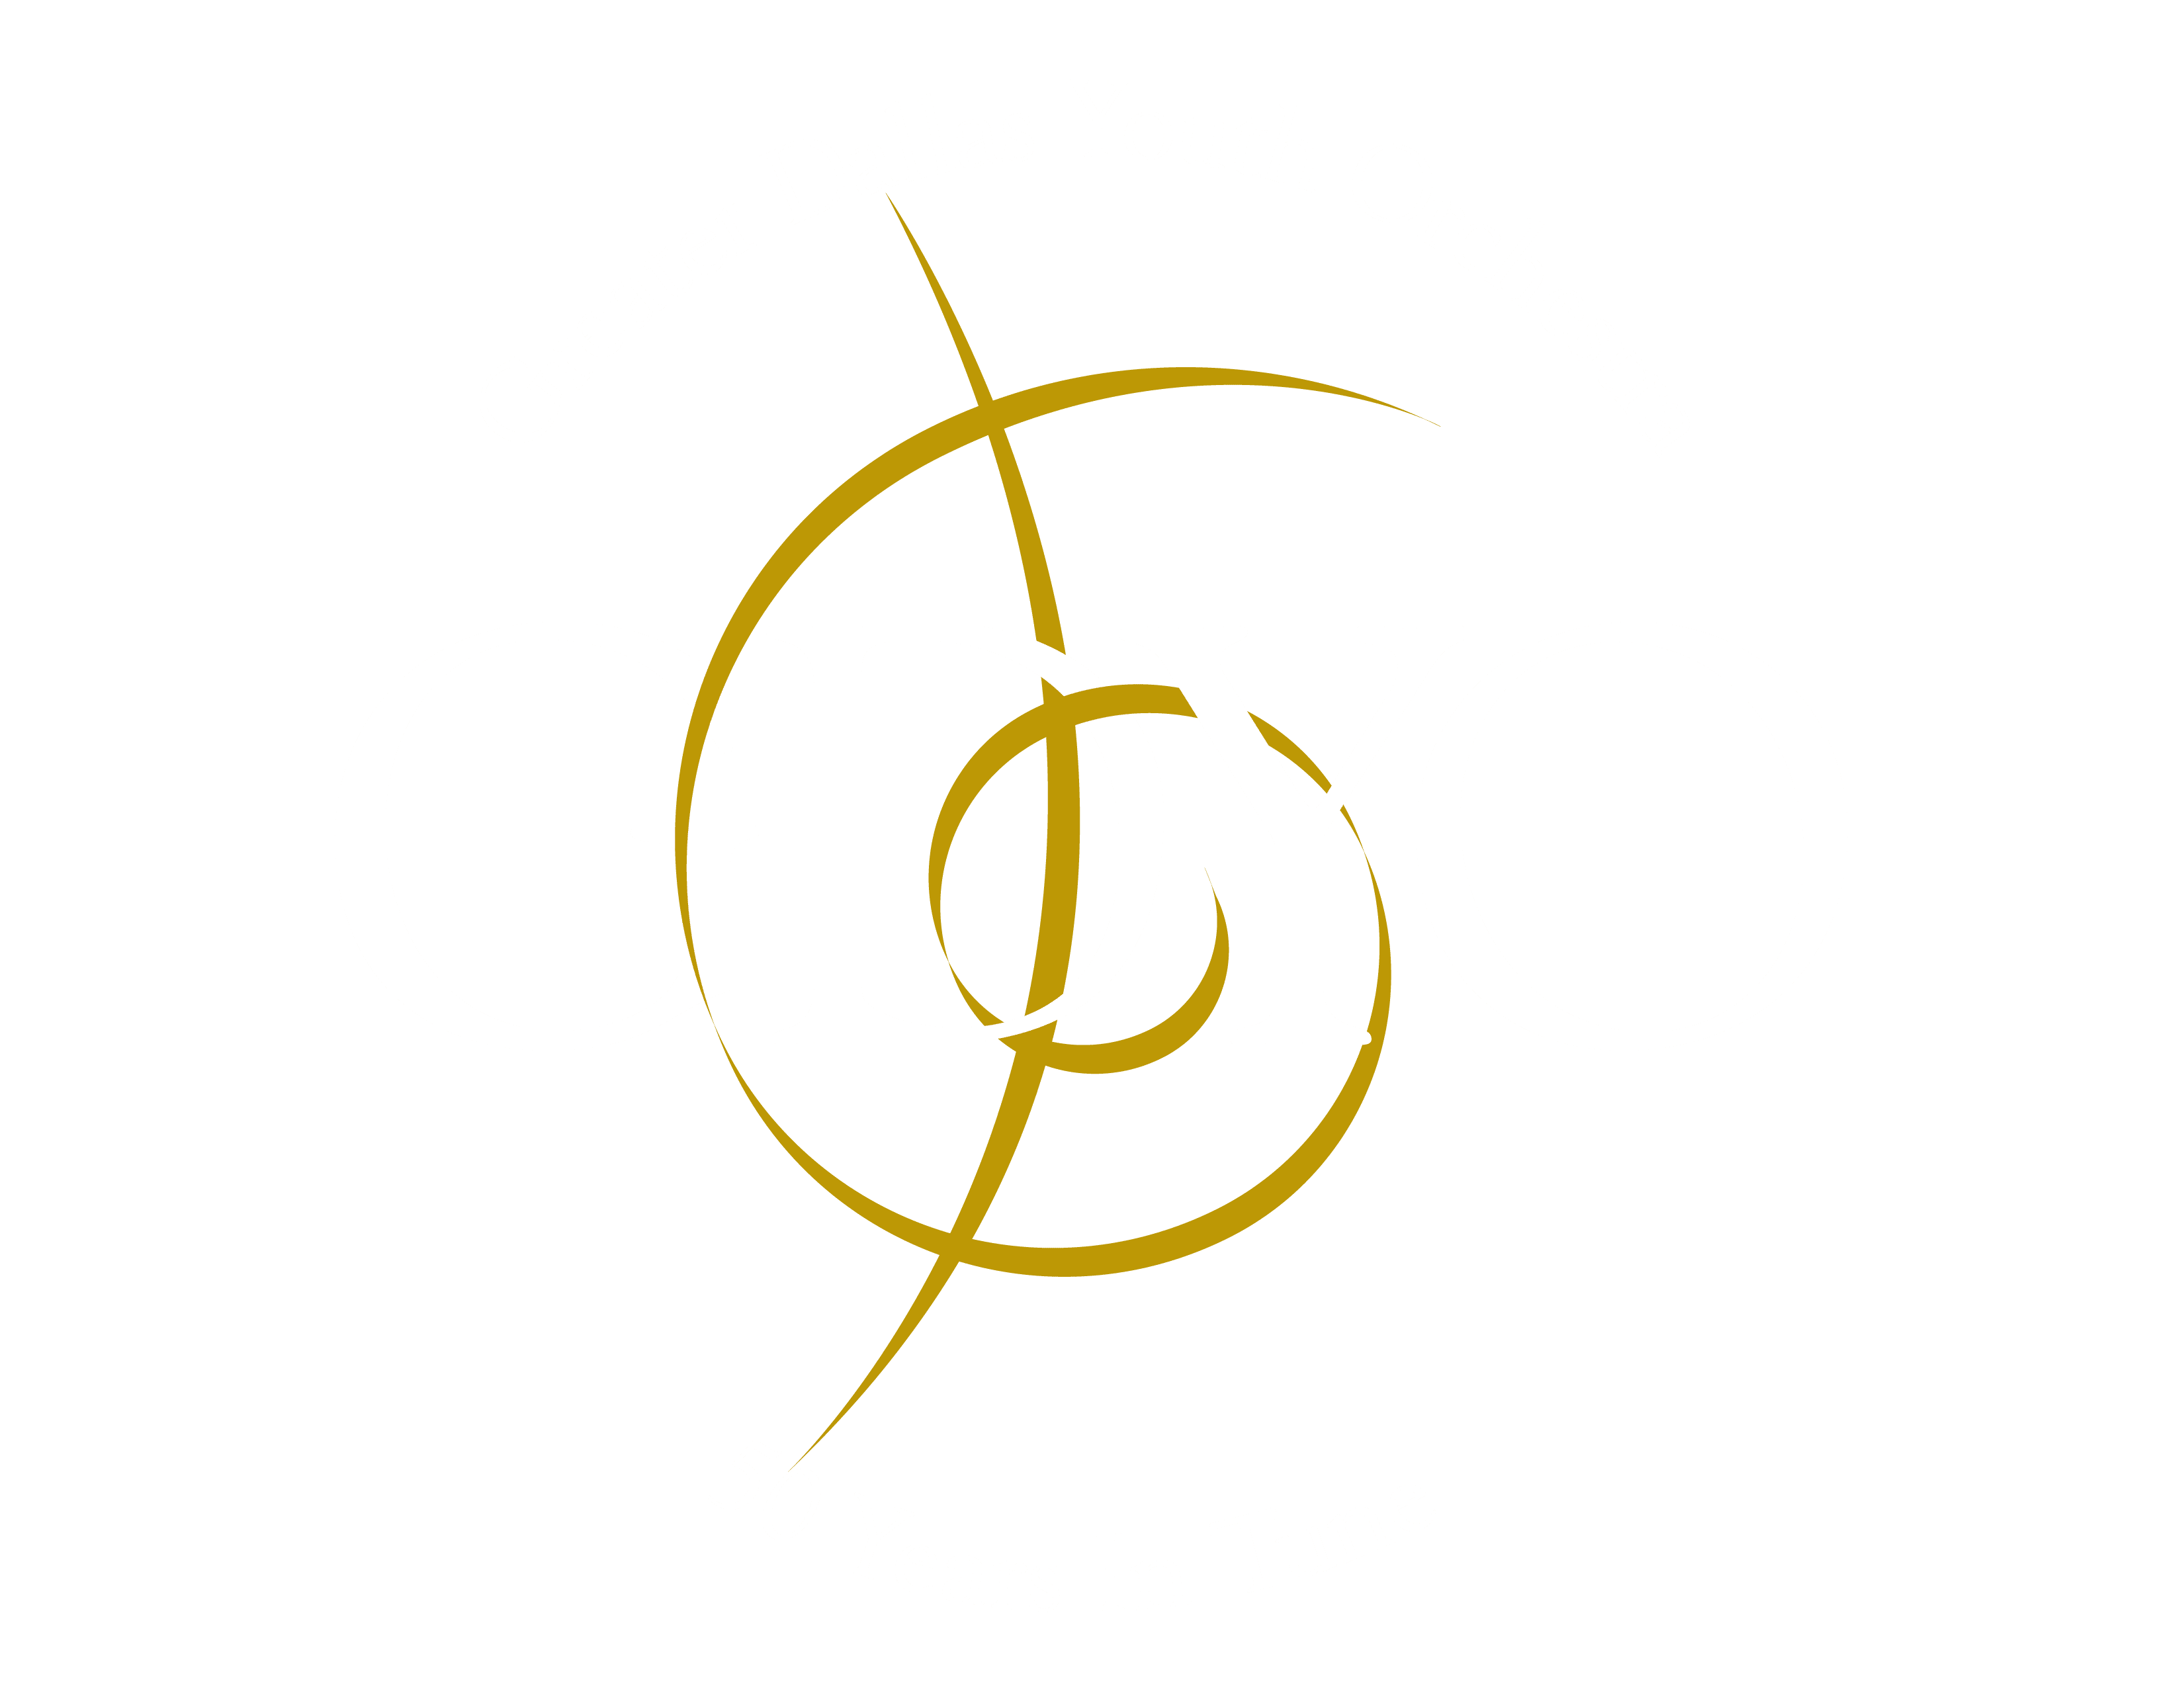 Greater Dallas Youth Orchestra